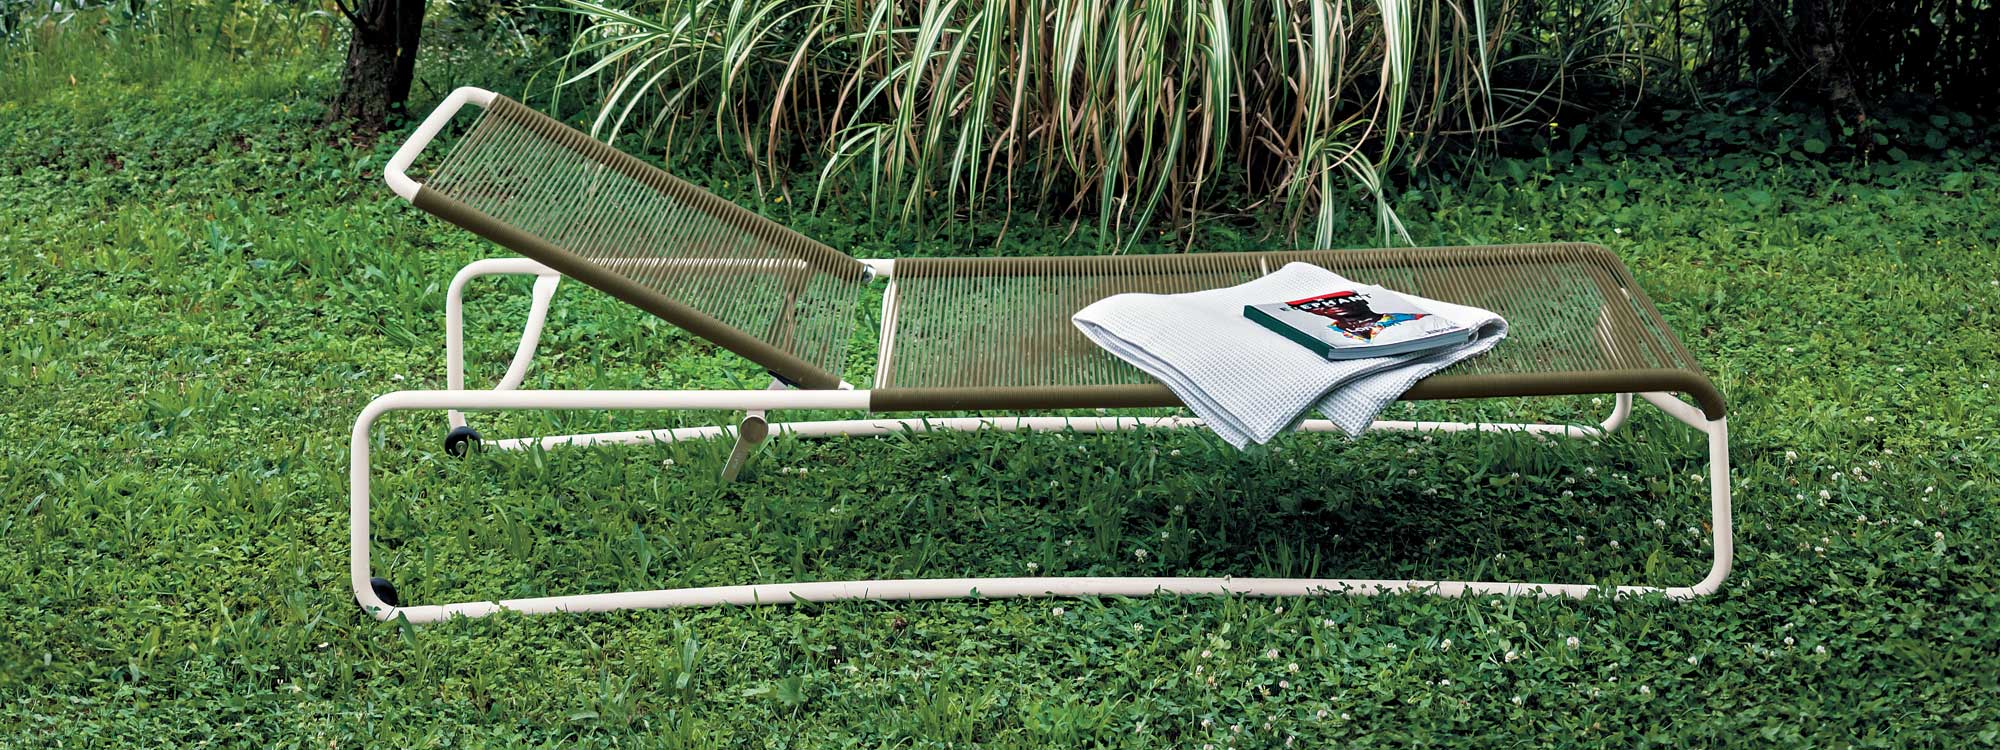 Image of Harp modern white sunbed with tobacco coloured rope seat and back, shown on grass